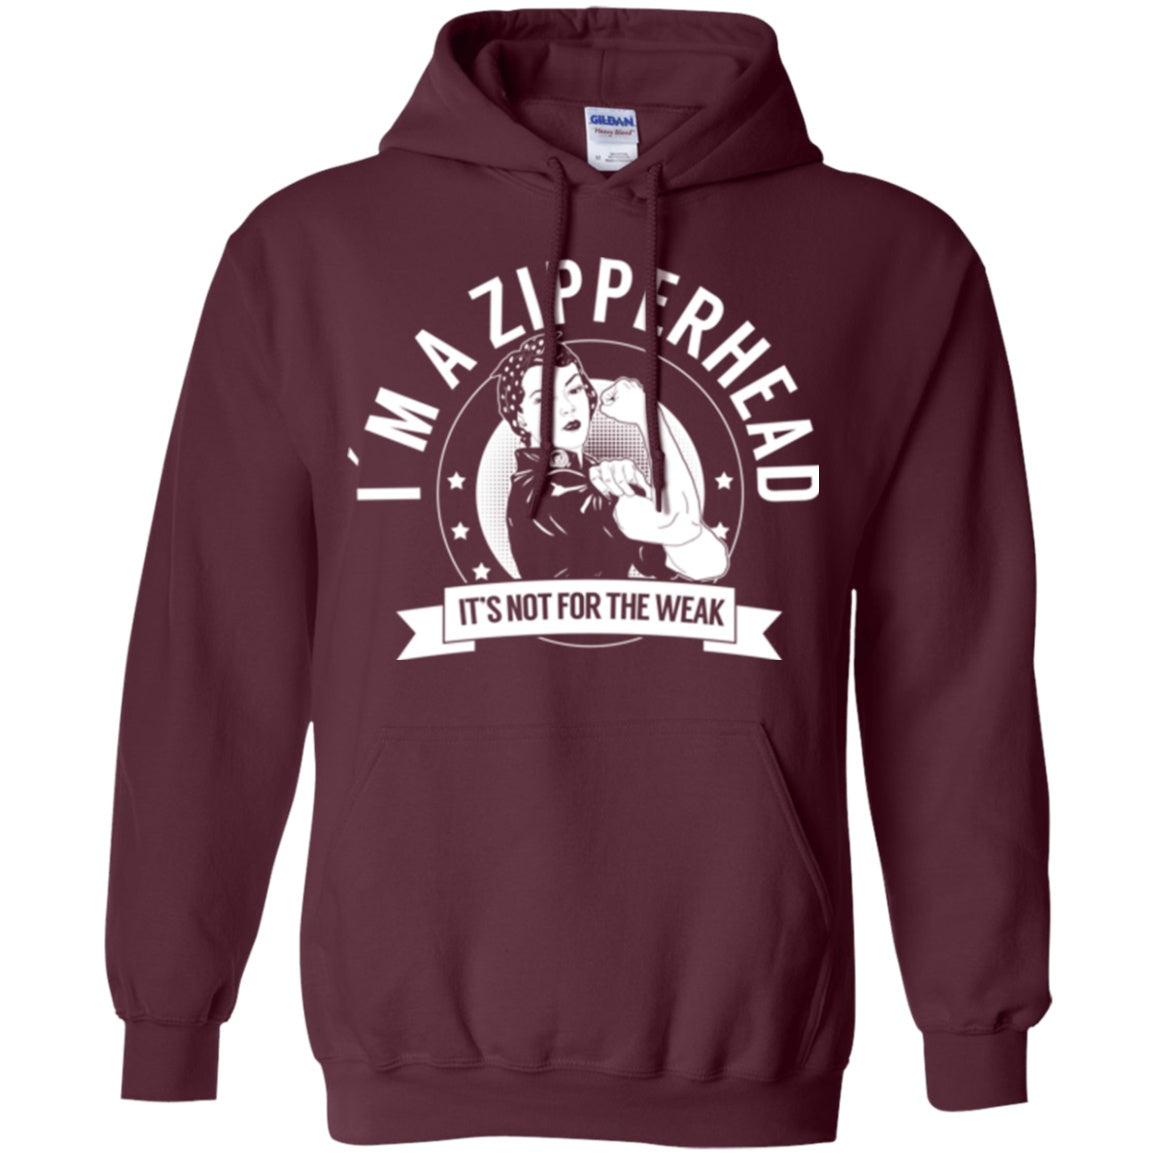 Zipperhead Not For The Weak Pullover Hoodie 8 oz. - The Unchargeables